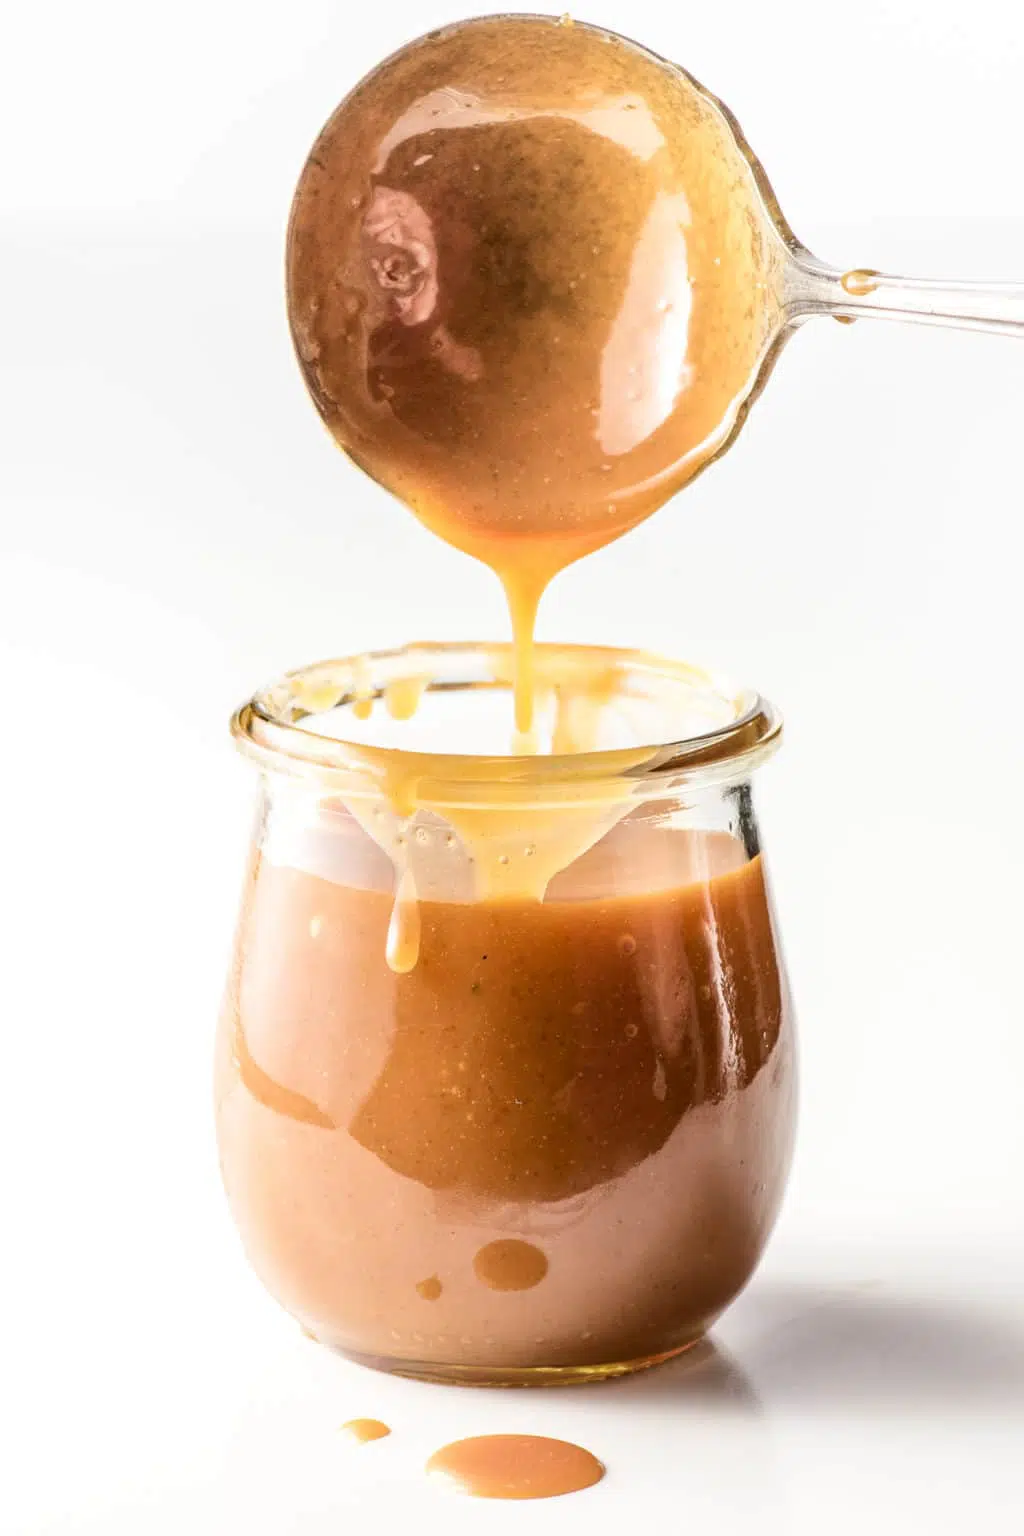 A spoon drizzling keto caramel into a small jar.